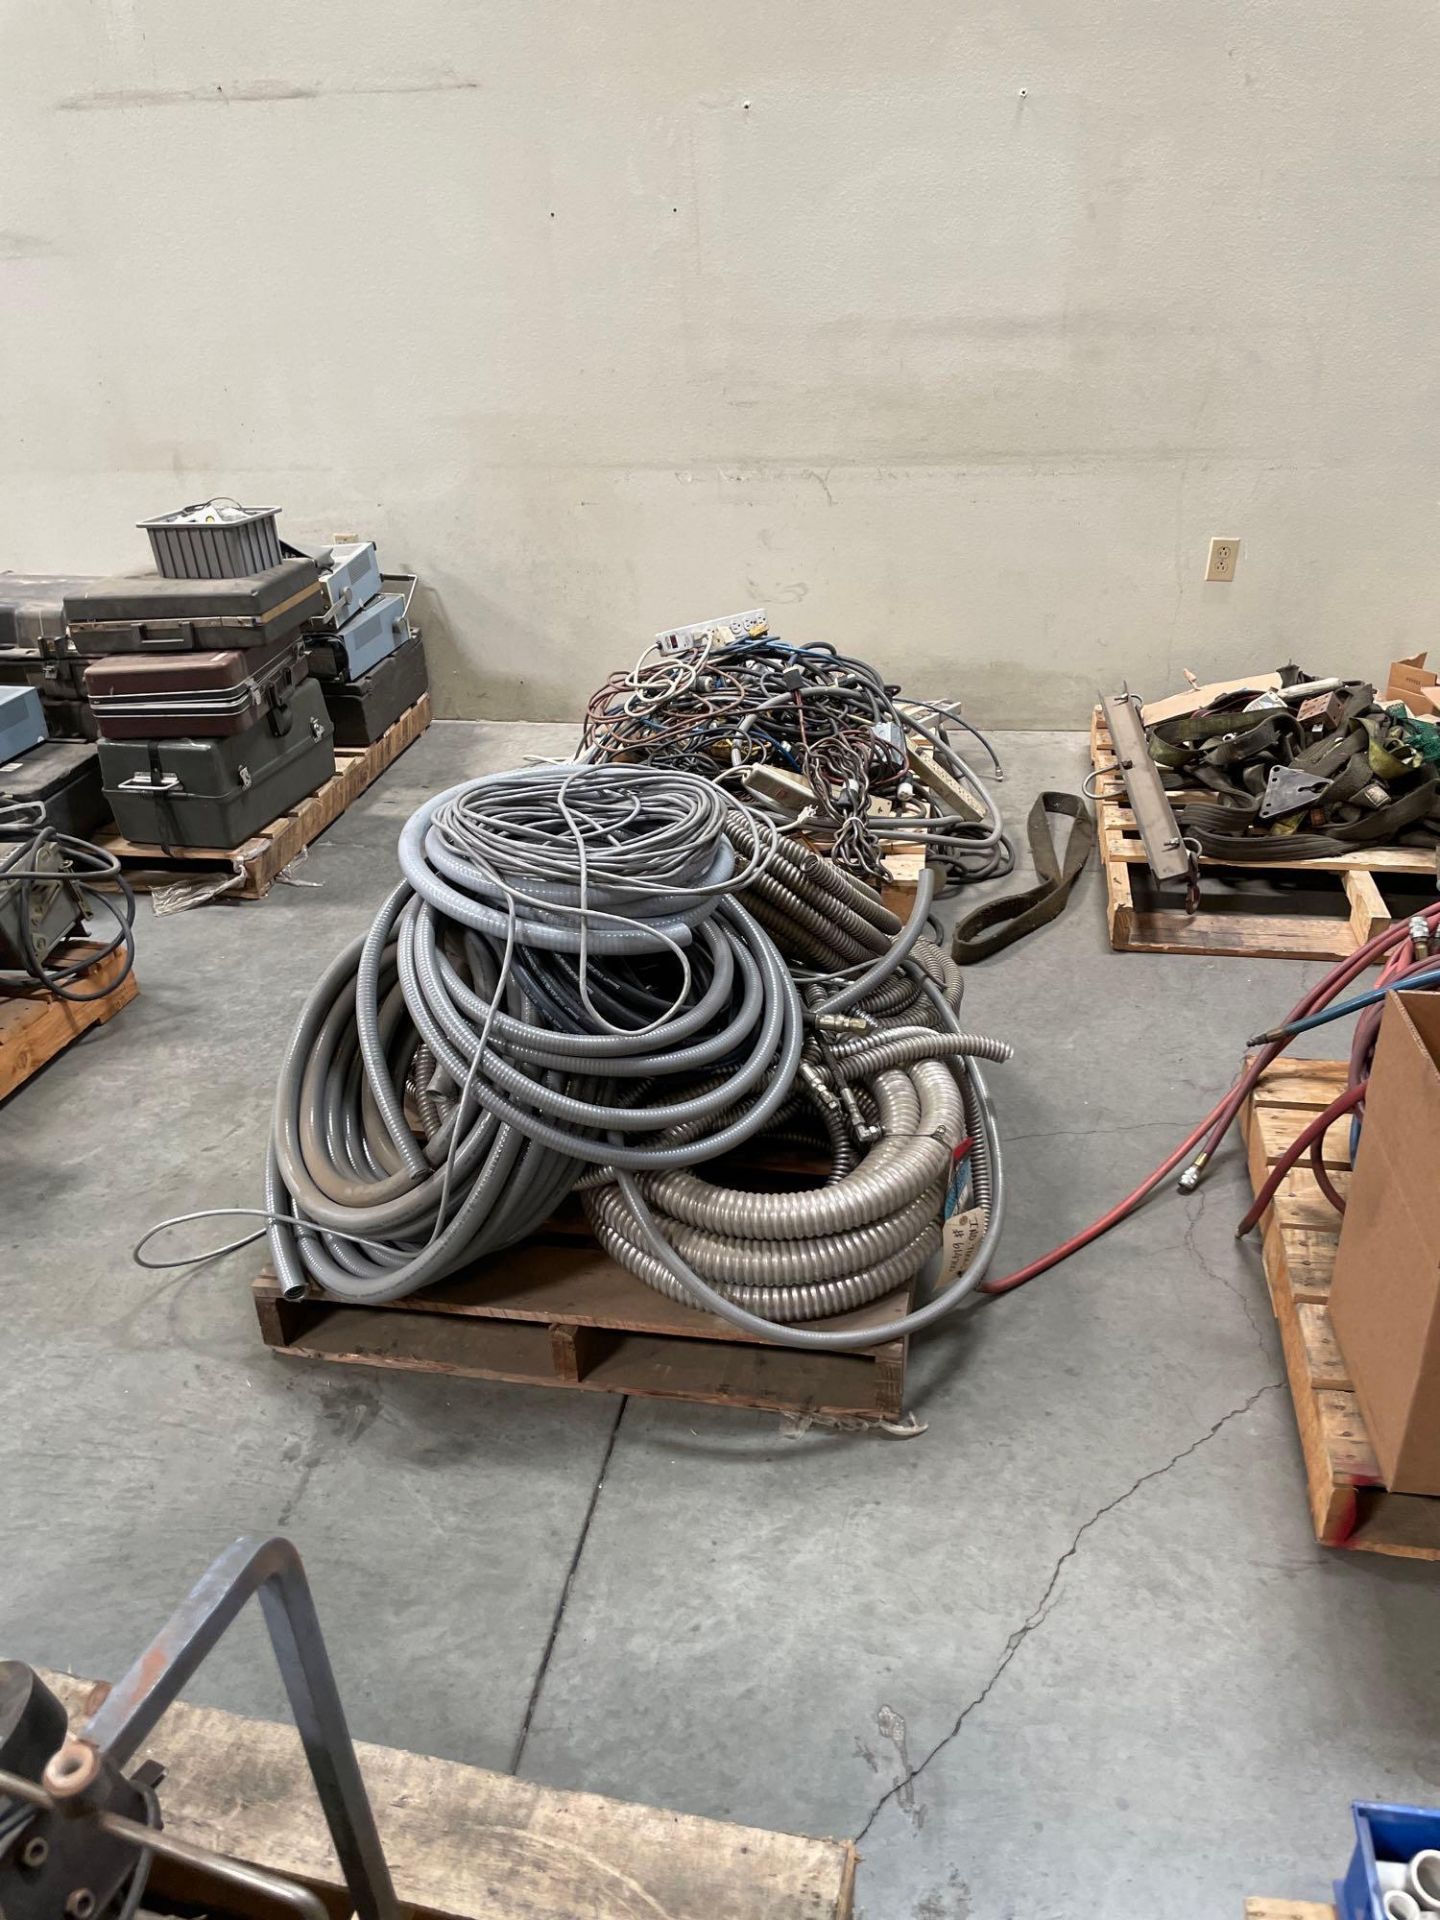 Miscellaneous Pallets with Extension Cords, Heavy Duty Straps, Plumbing Supplies, Hoses, Electrical - Image 4 of 6